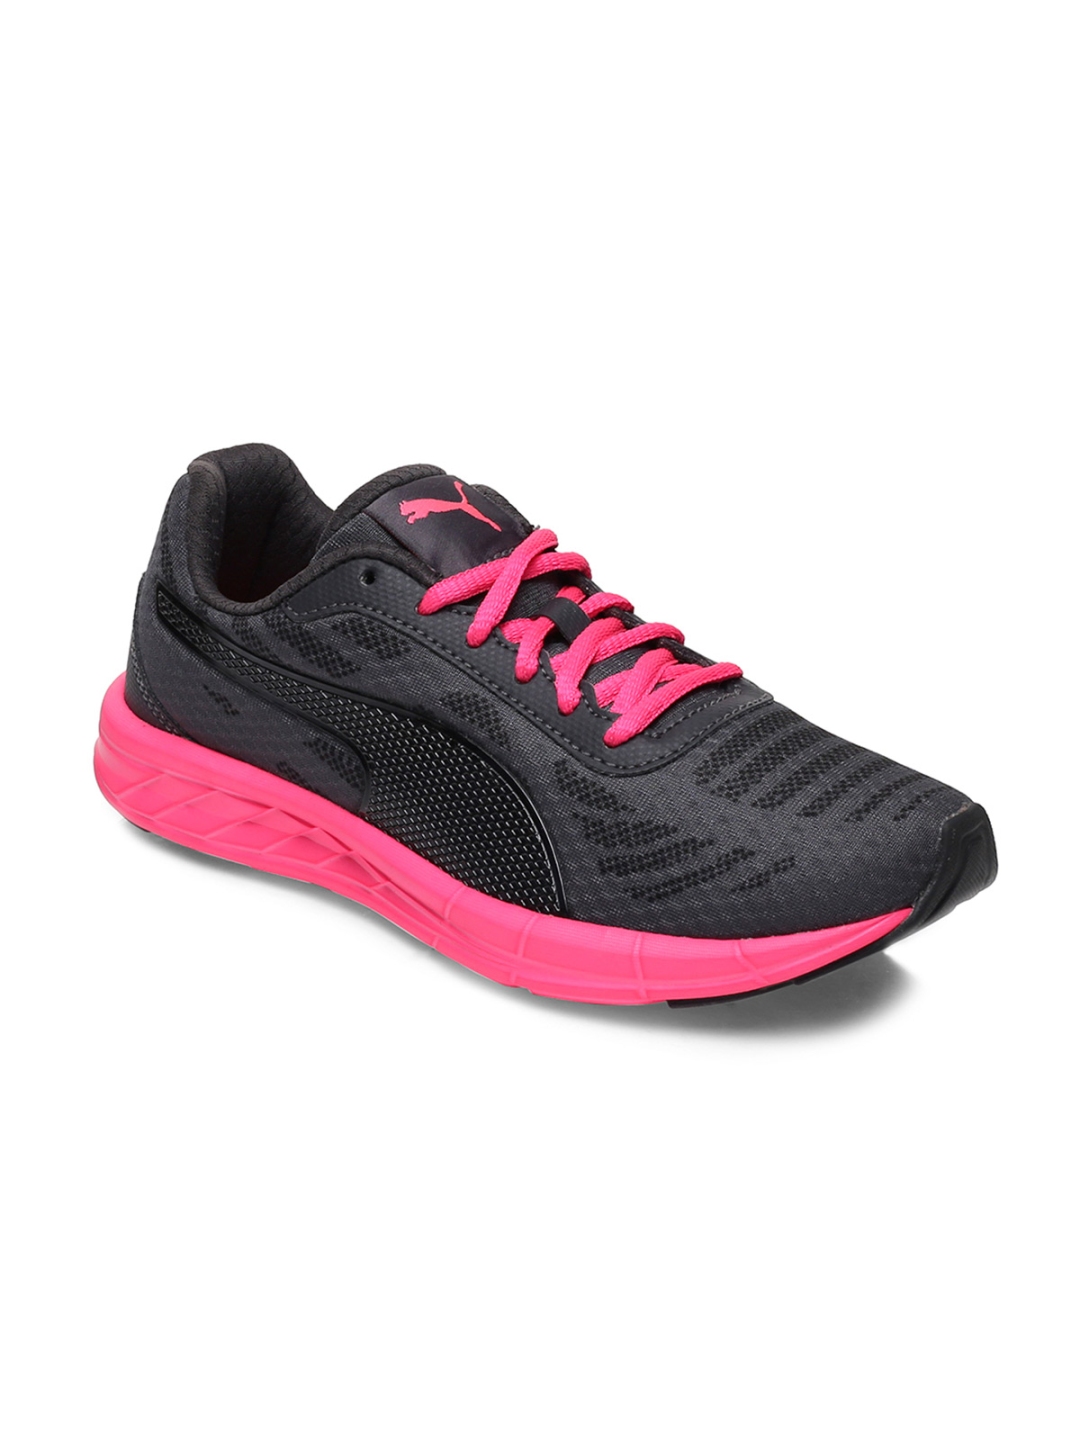 Buy Puma Women Black Pink Meteor Wn S Running Shoes - Sports Shoes for ...